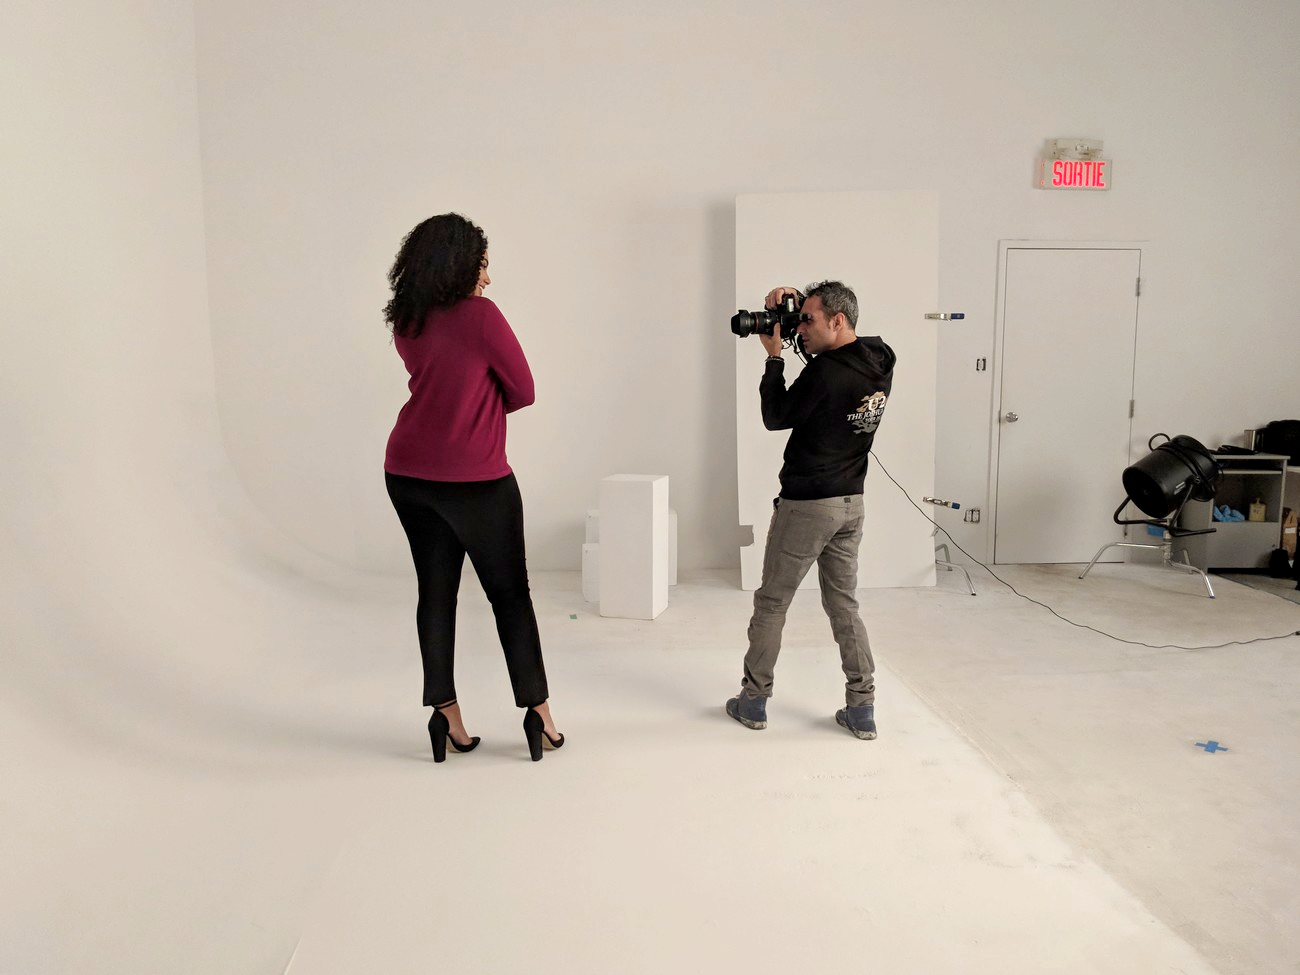 Behind the Scenes of Our Photo Studio